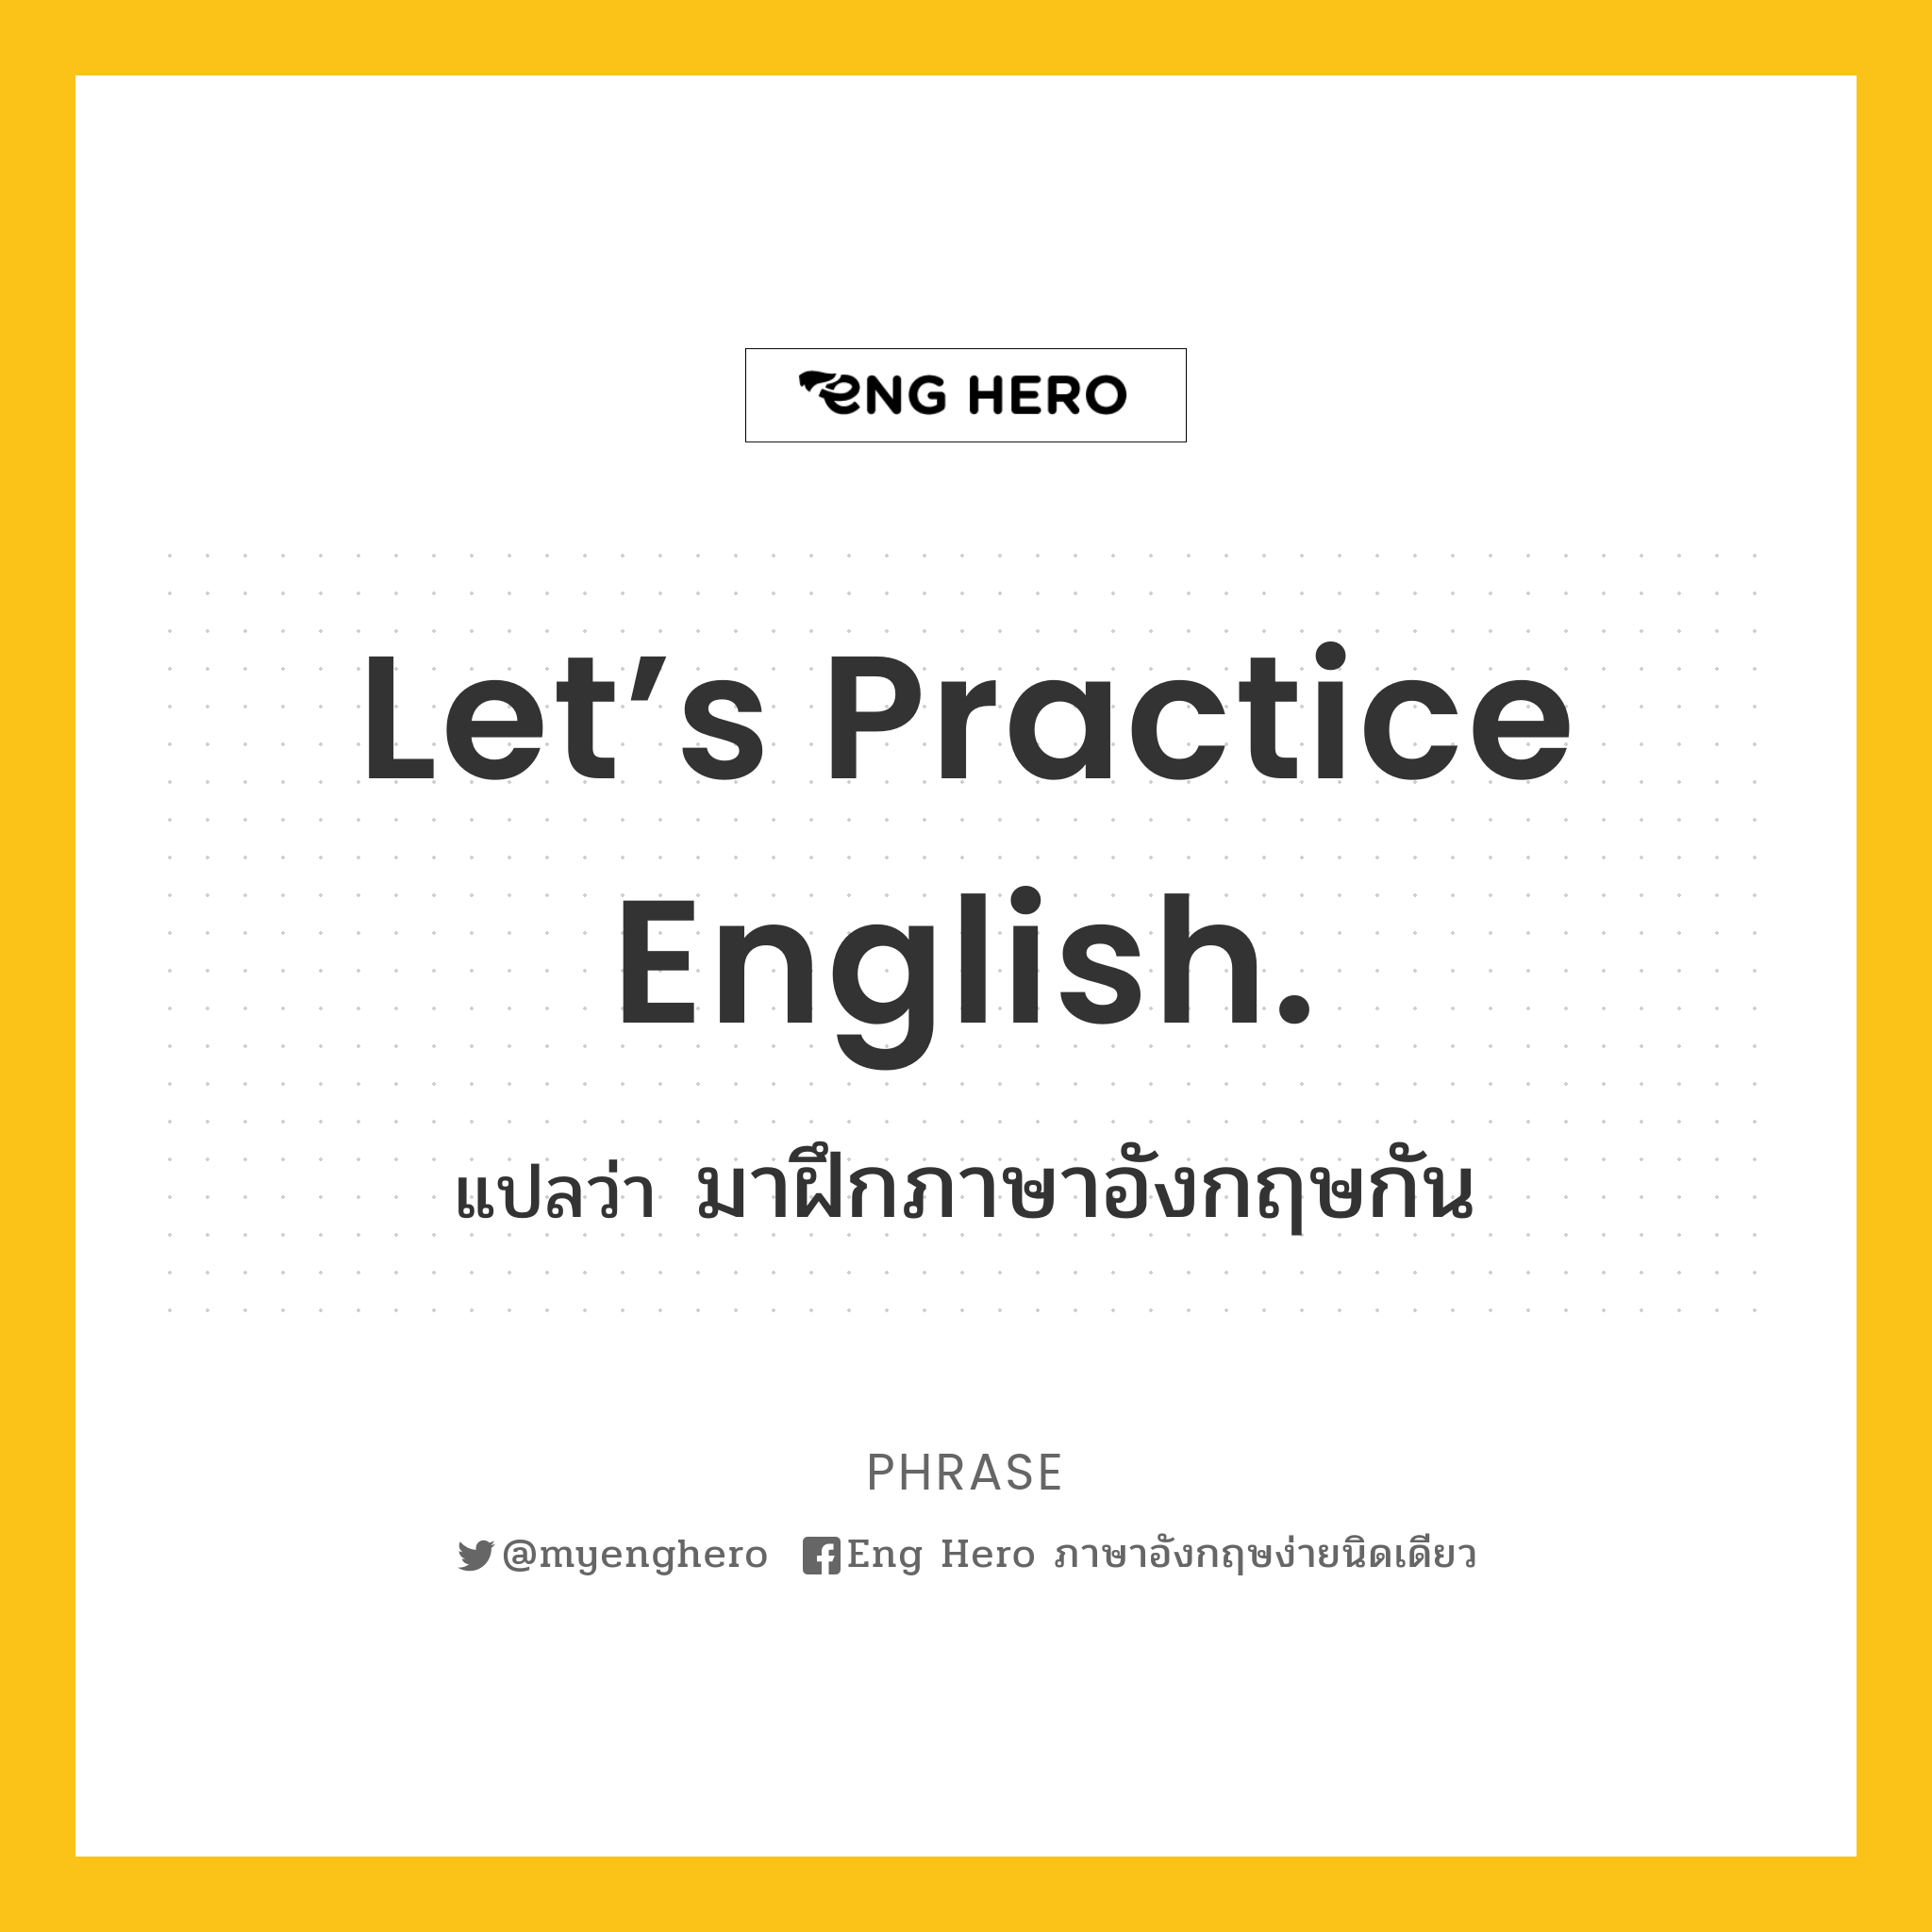 Let’s practice English.